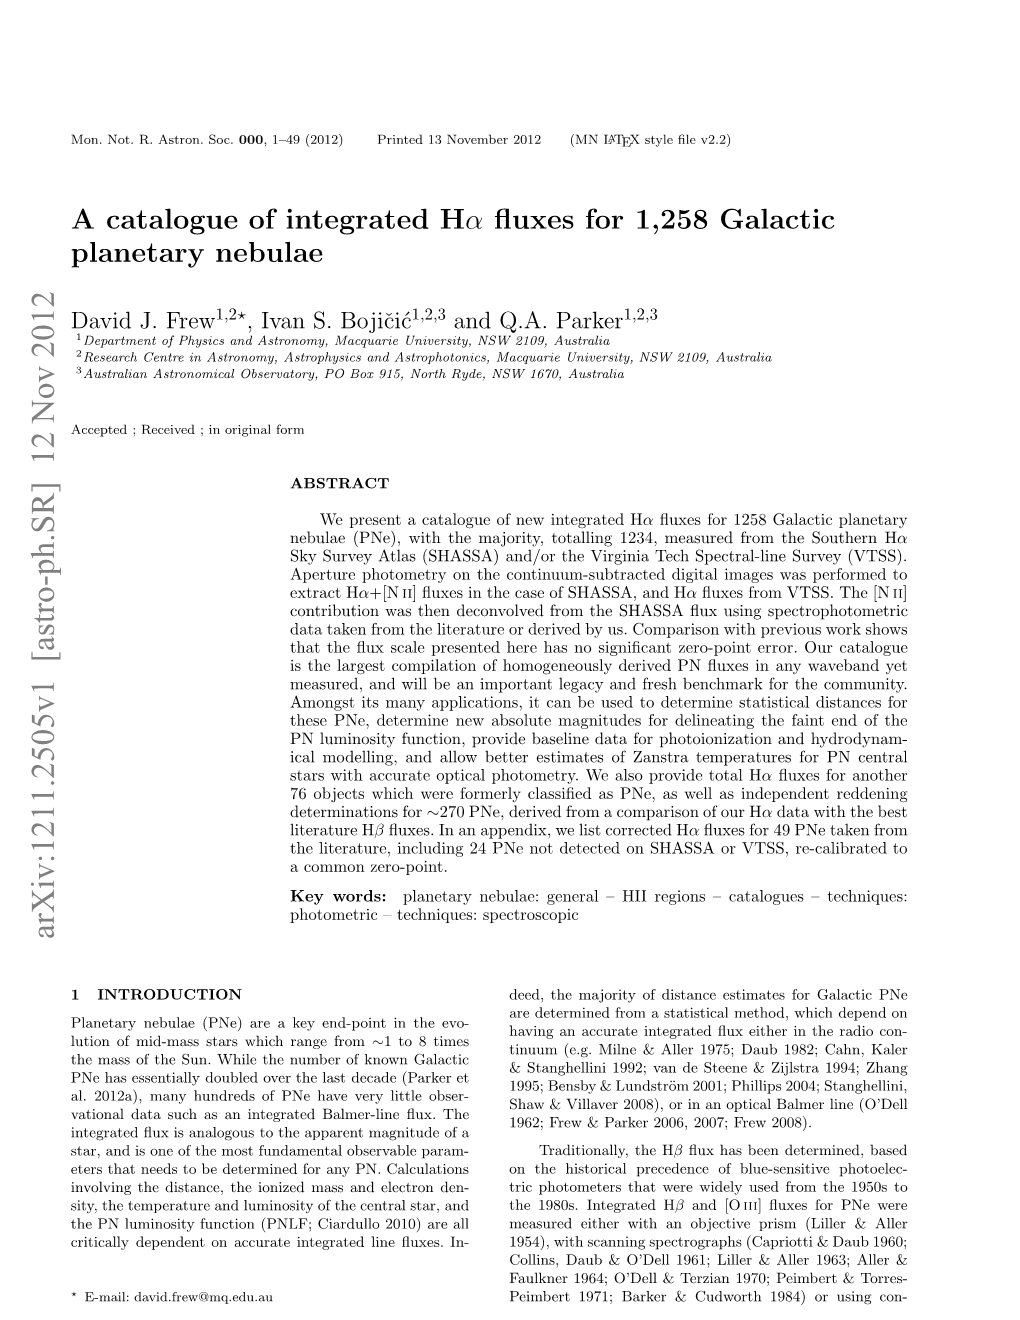 A Catalogue of Integrated H-Alpha Fluxes for 1258 Galactic Planetary Nebulae